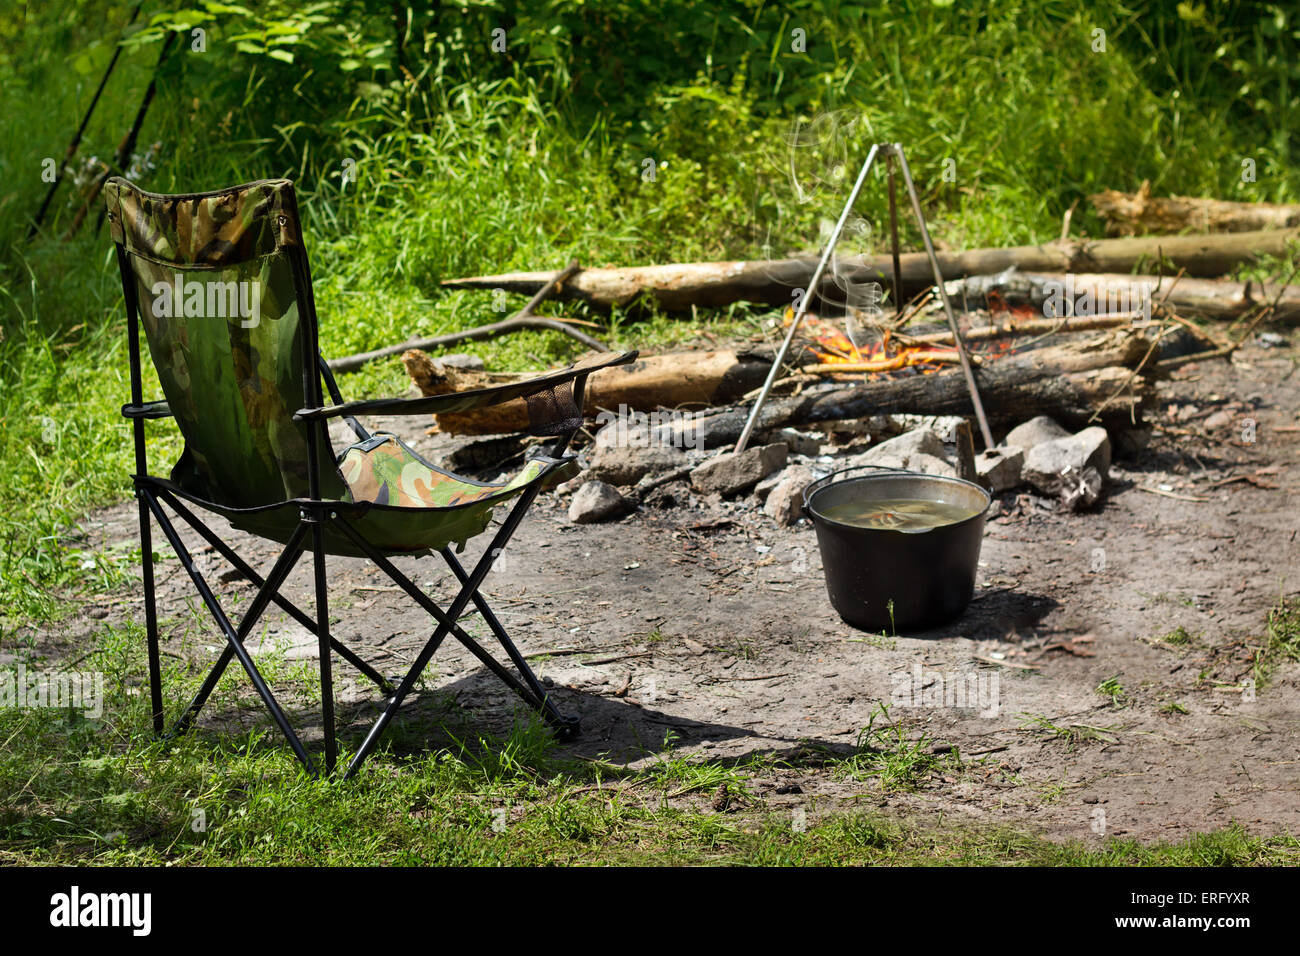 Relaxing and preparing food on campfire in camping, summer scene outdoors Stock Photo